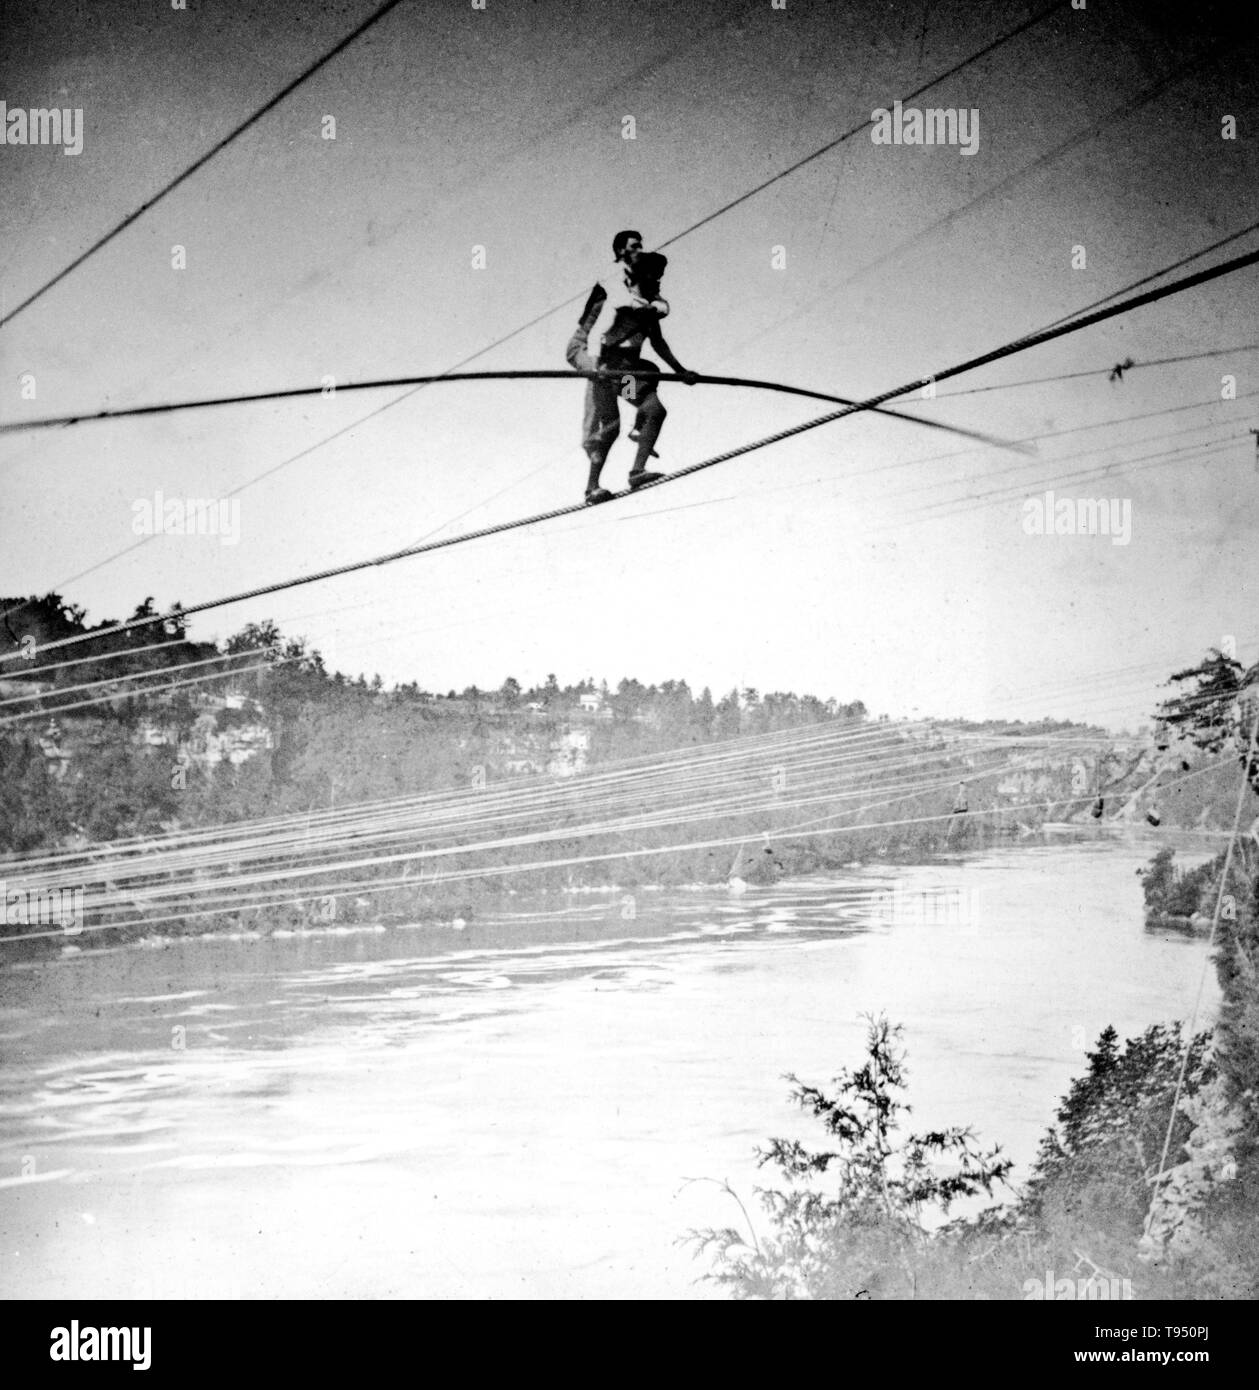 Entitled: 'Blondin carries manager Harry Colcord on back over Niagara Falls.' Charles Blondin (born Jean François Gravelet, February 28, 1824 - February 22, 1897) was a French tightrope walker and acrobat, called the 'Chevalier Blondin', or simply 'The Great Blondin'. At the age of five he was sent to the École de Gymnase at Lyon and, after six months training as an acrobat, made his first public appearance as 'The Boy Wonder'. Stock Photo